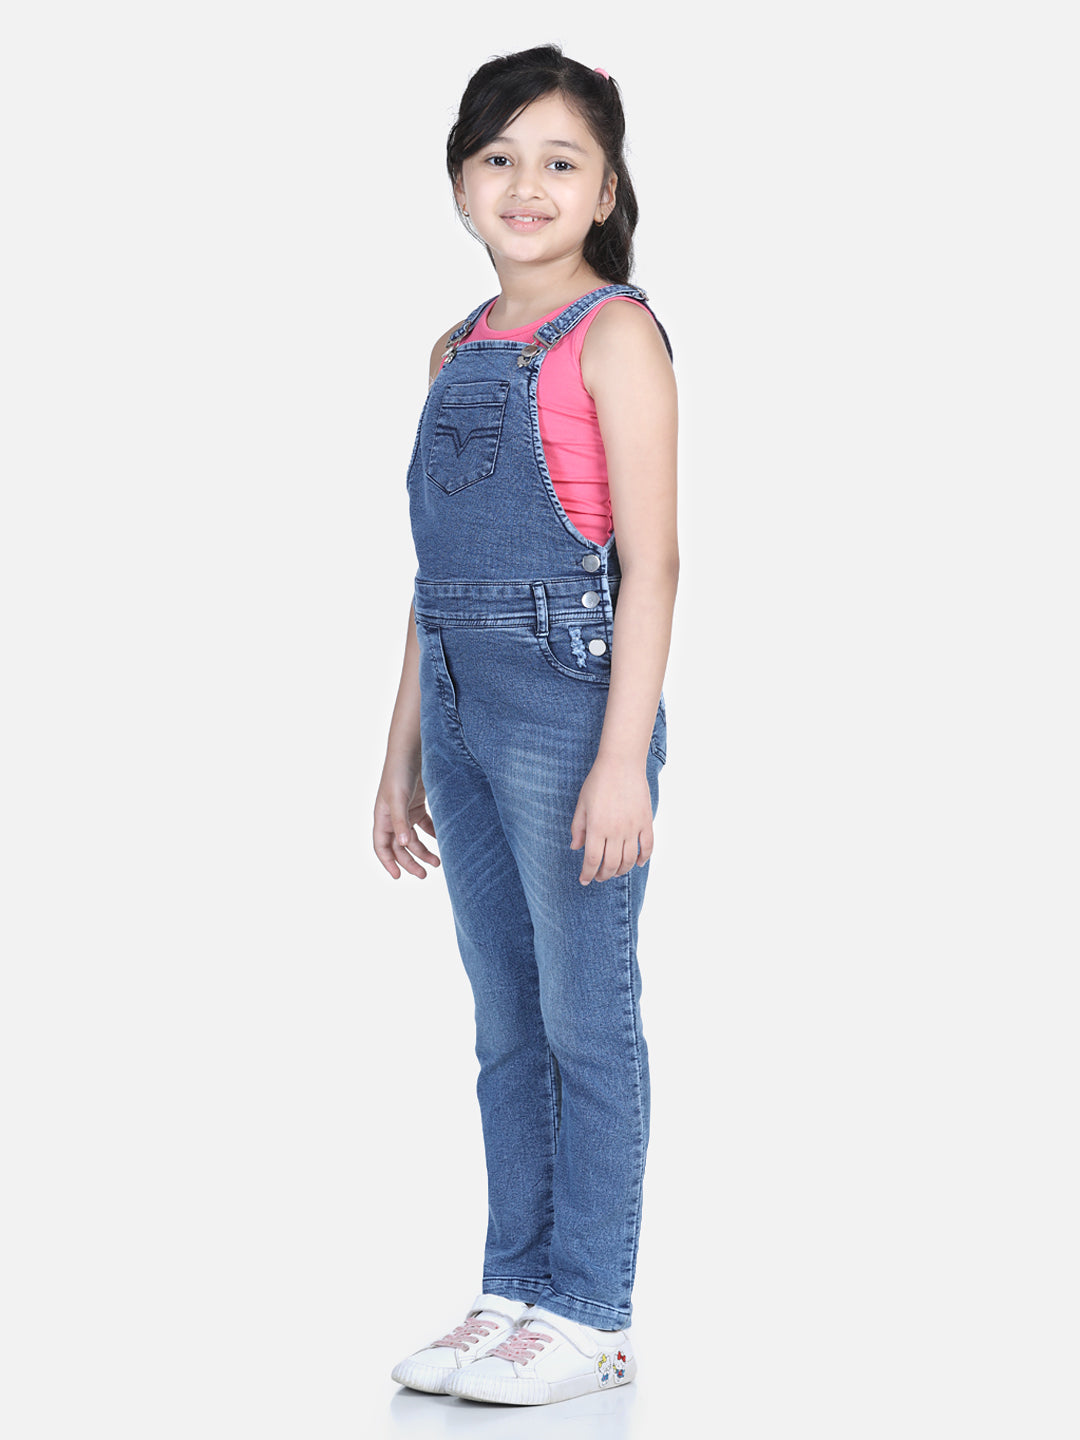 Girl's Denim Dungaree With Patchwork Denim (T-Shirt Not Included) - StyleStone Kid